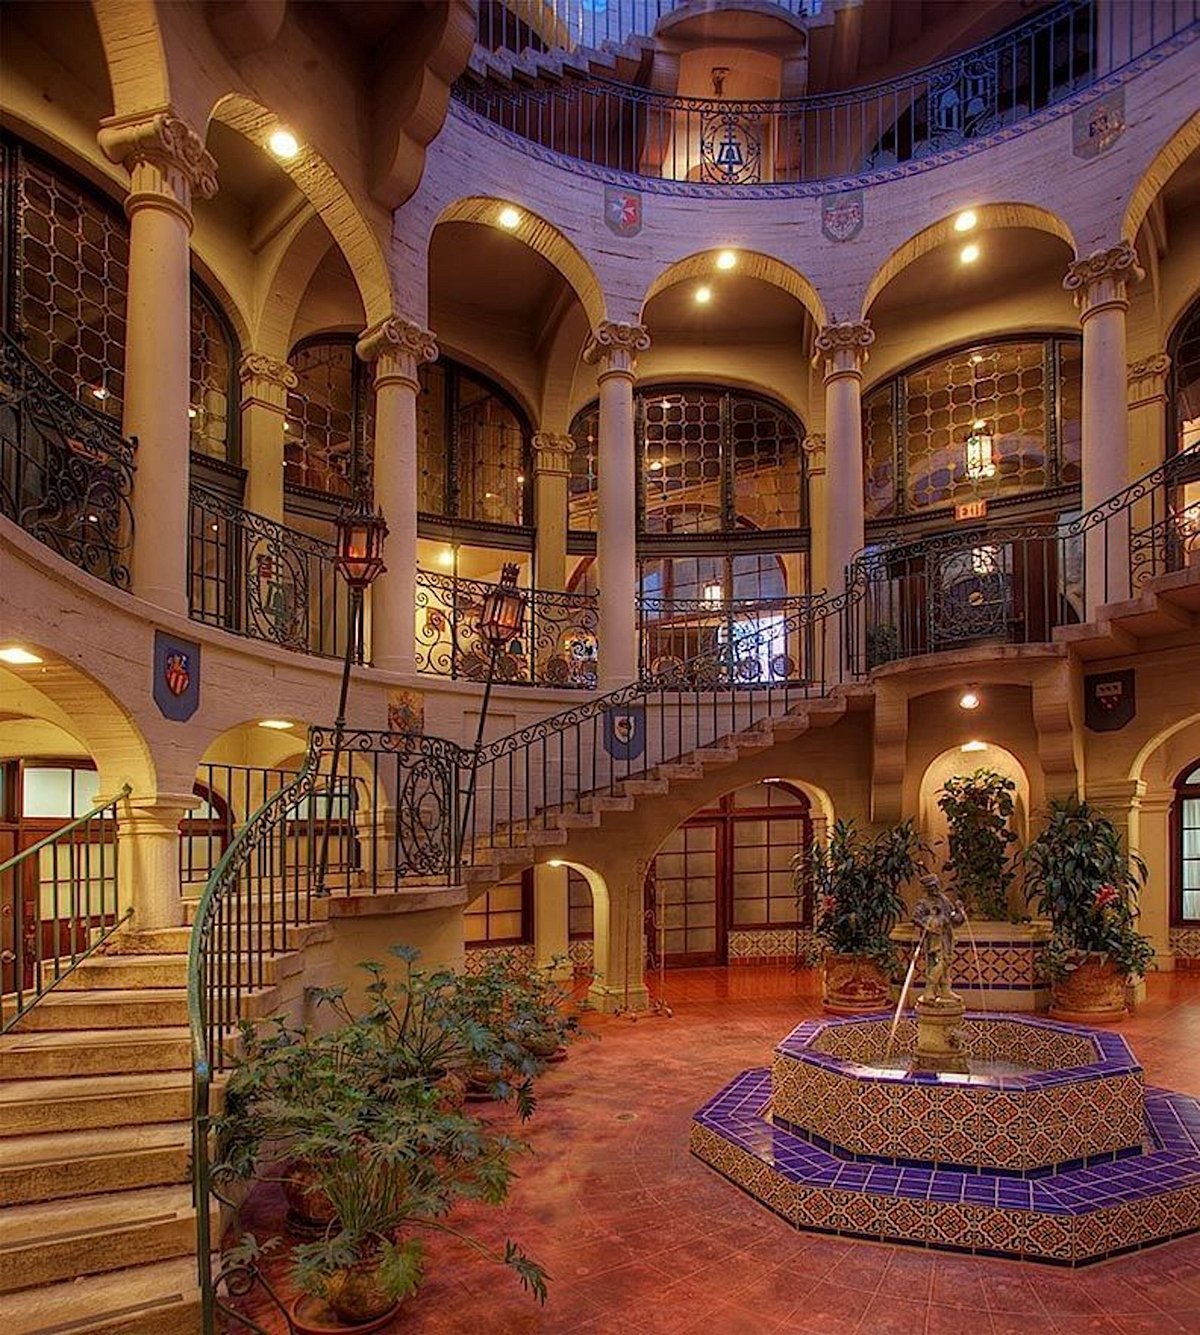 THE MISSION INN HOTEL & SPA (Riverside) - Hotel Reviews, Photos, Rate ...